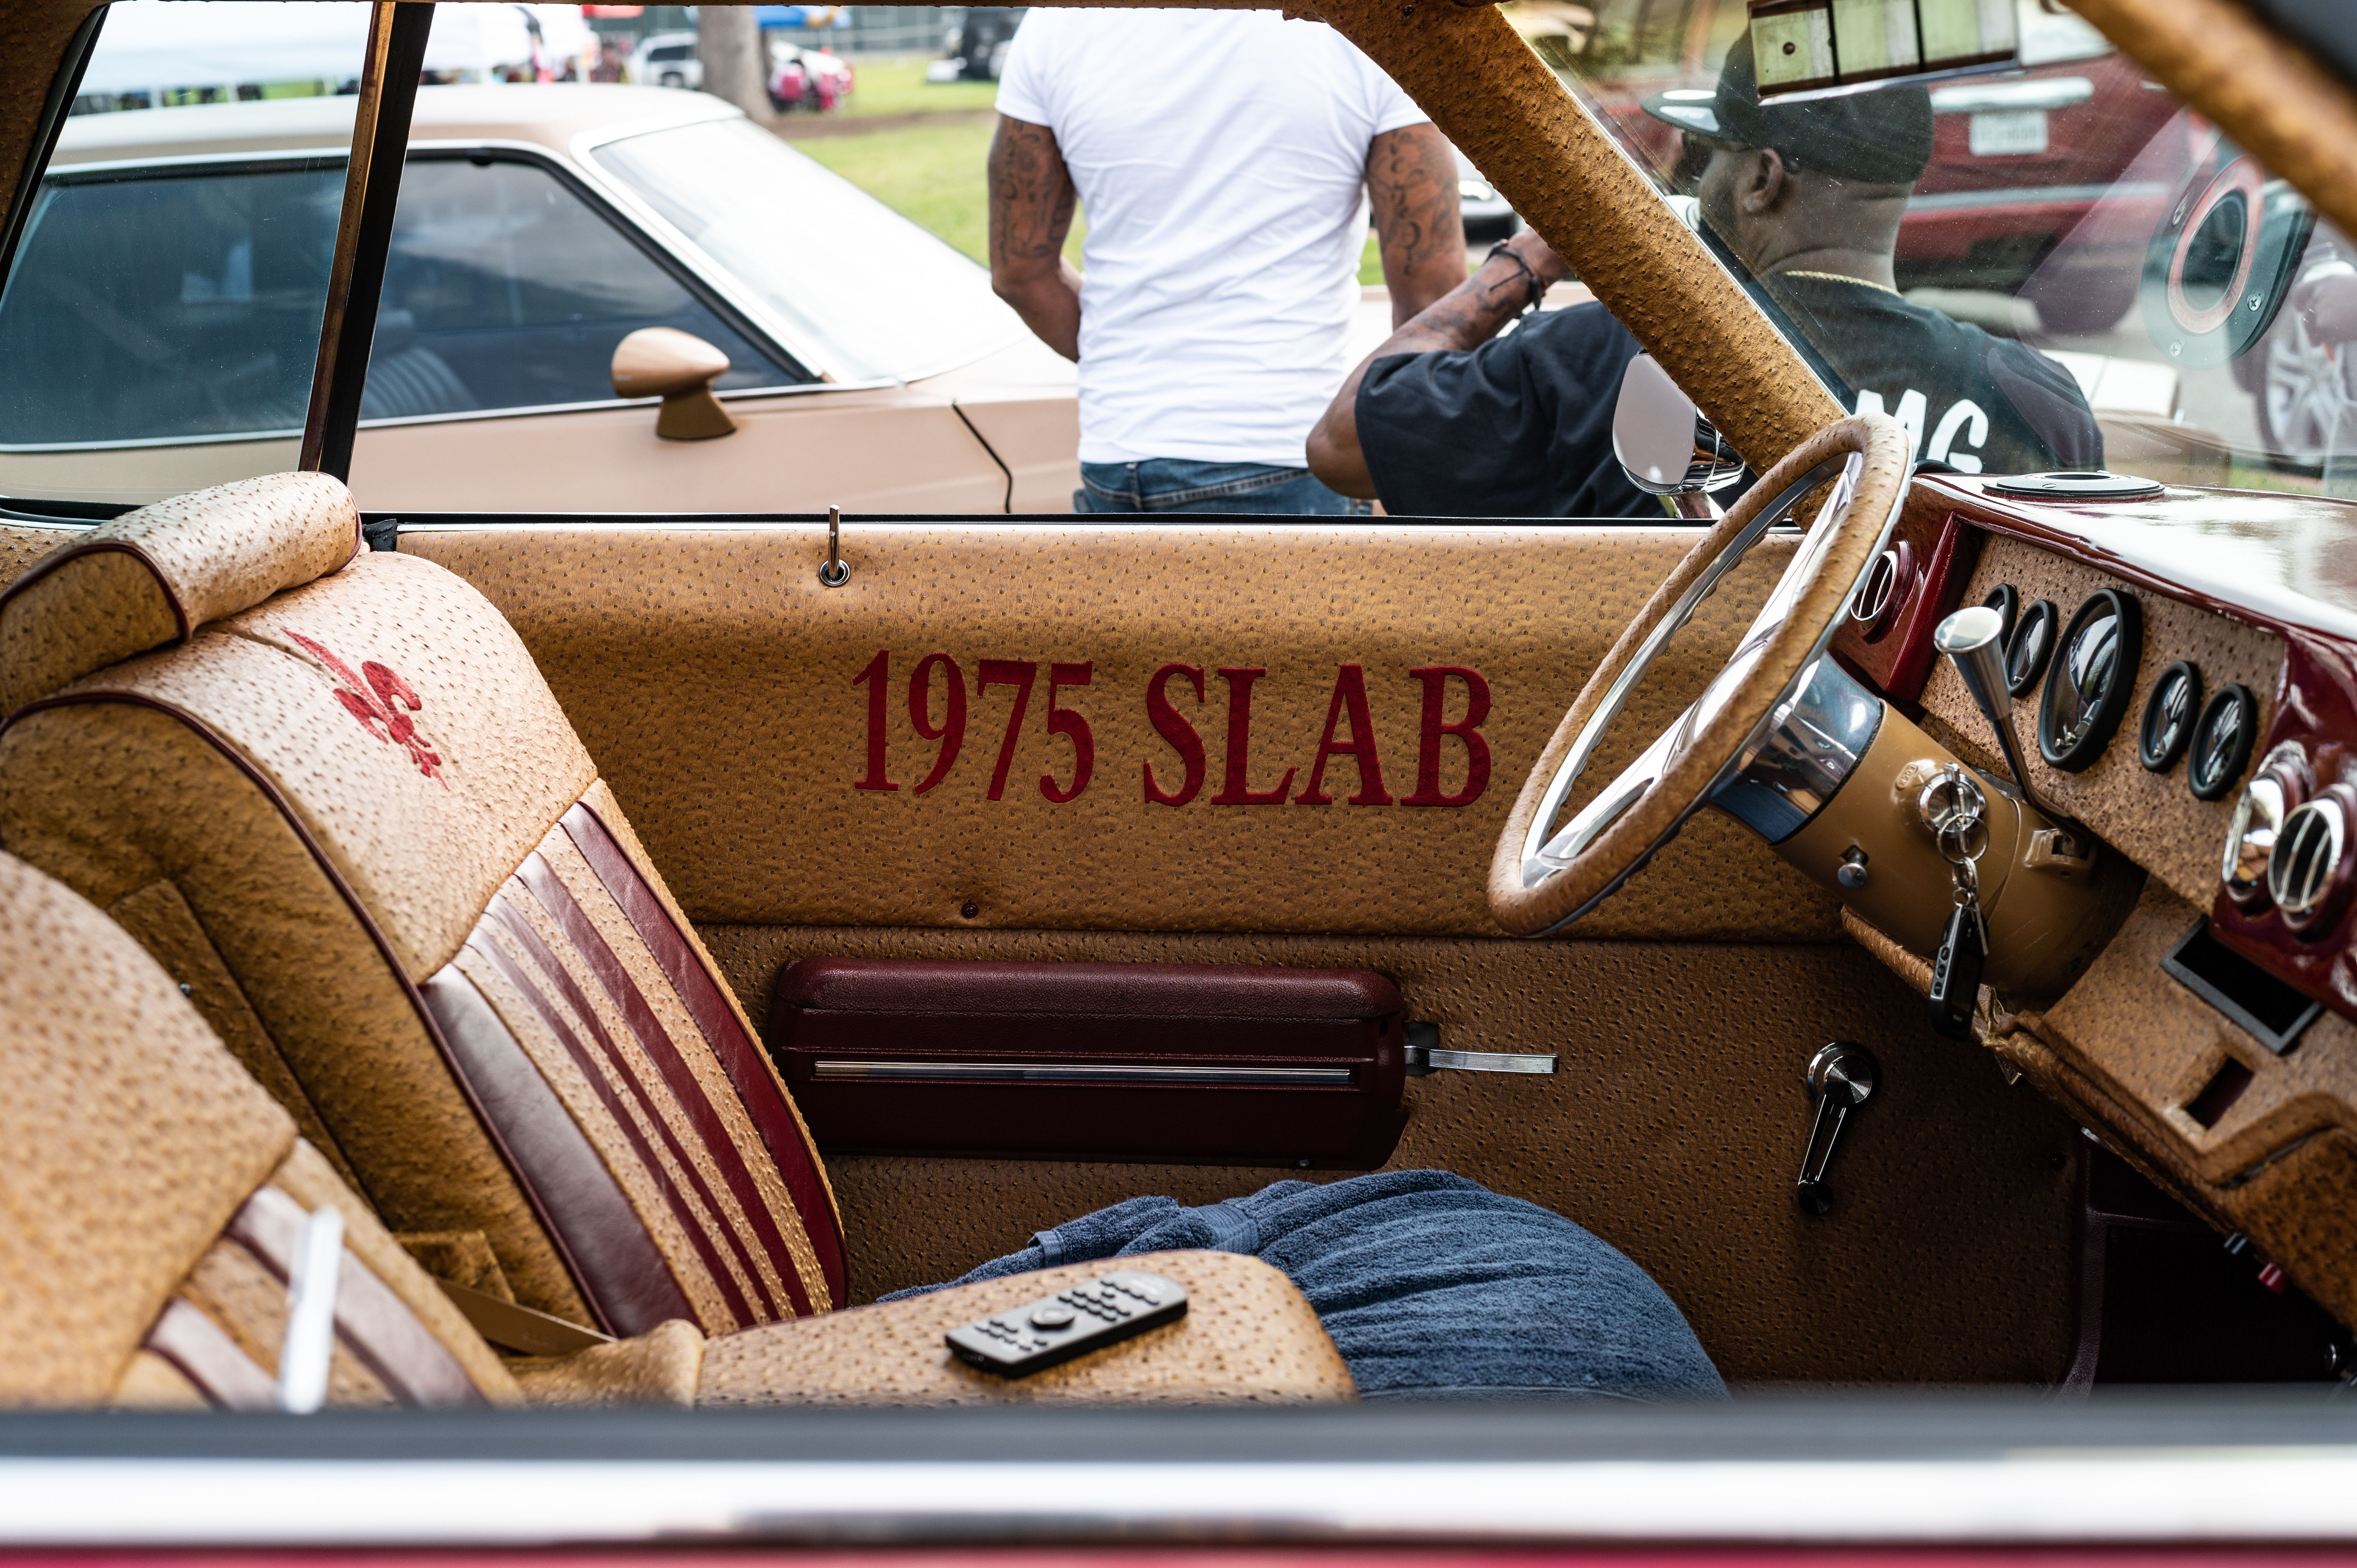 All you need to know about SLAB car culture